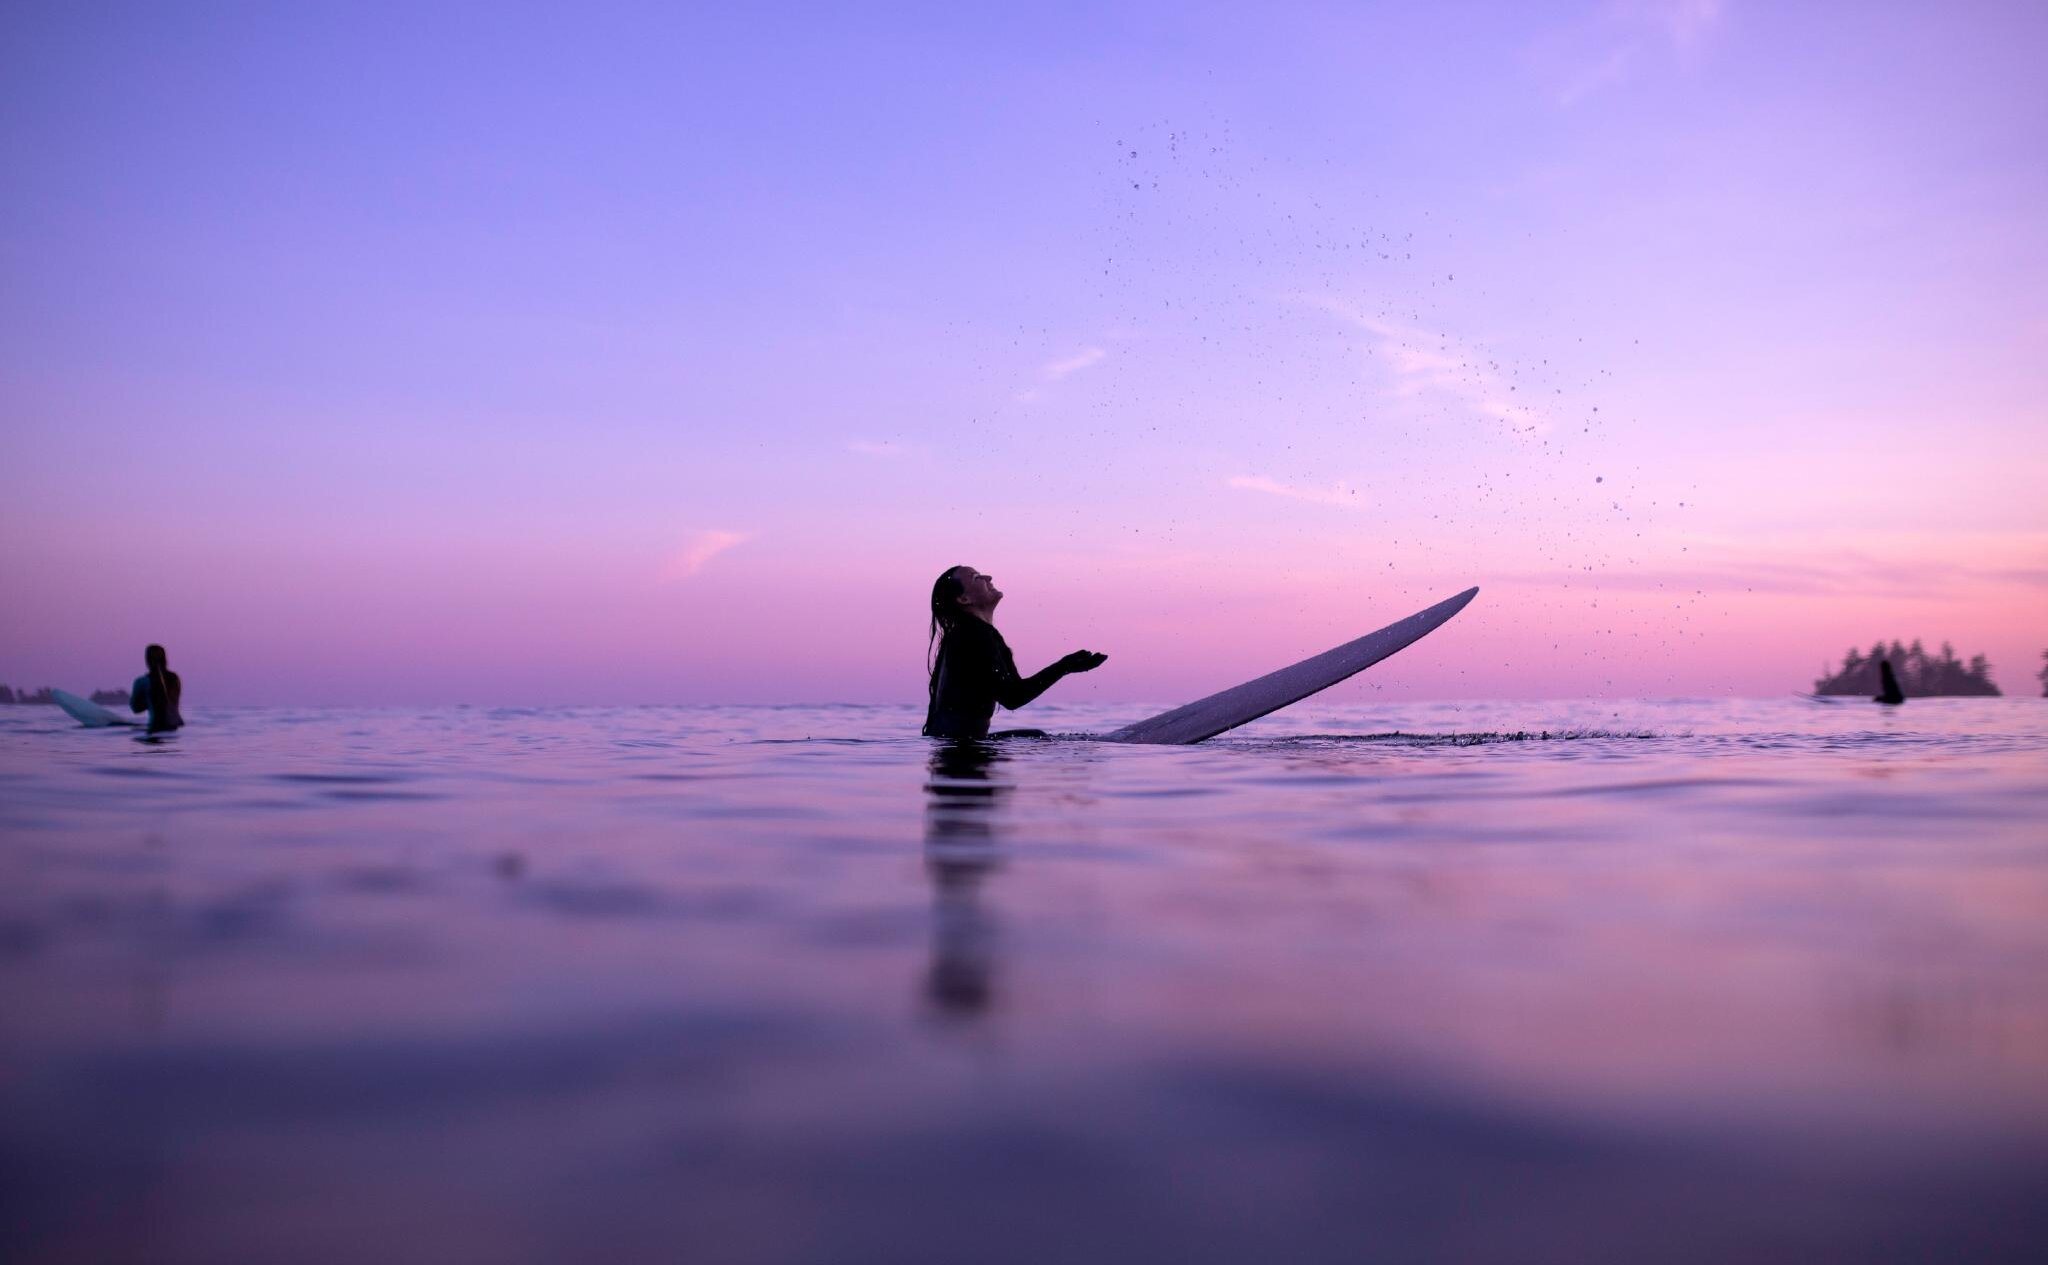 Purple skies at sunset with a surfer flipping water in her hands while sitting on her board in the ocean